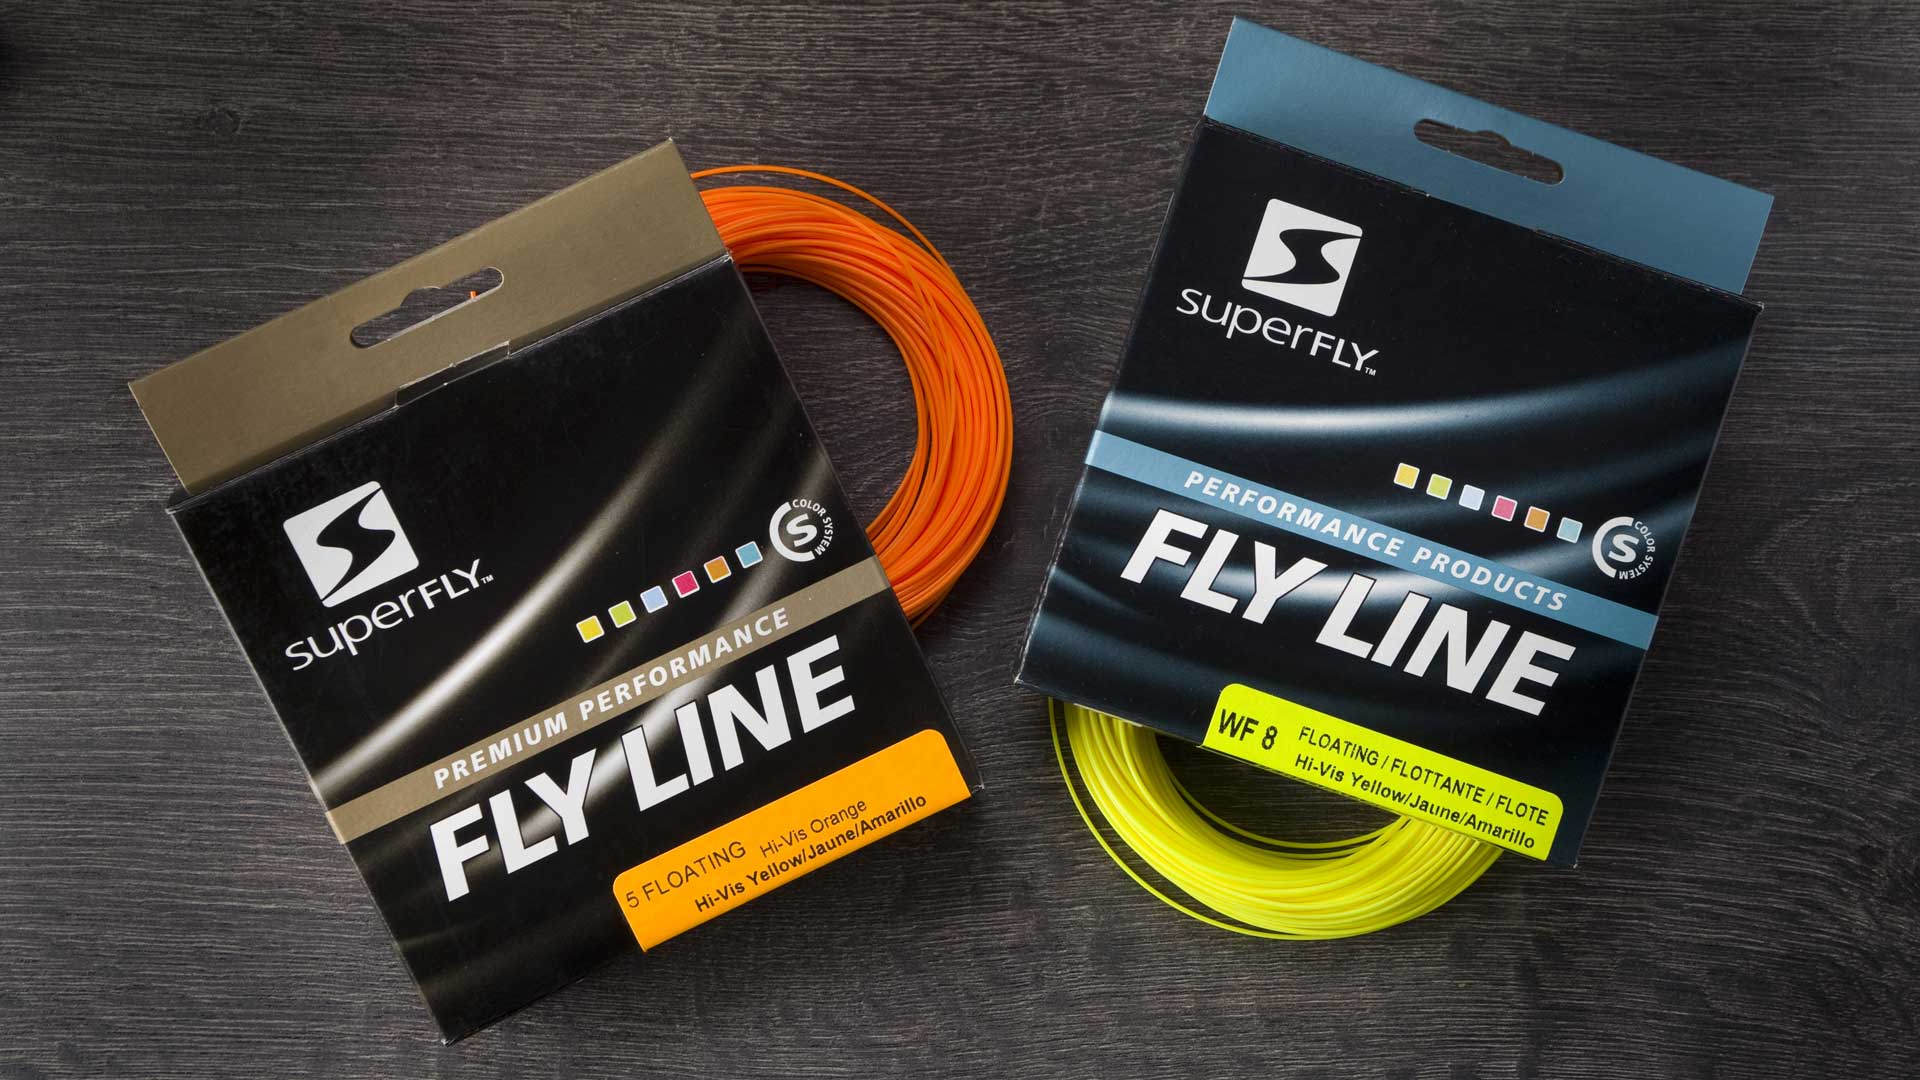 https://www.simplysuperfly.com/wp-content/uploads/2014/06/xl-superfly-0029-detail-fly-line-fishing.jpg